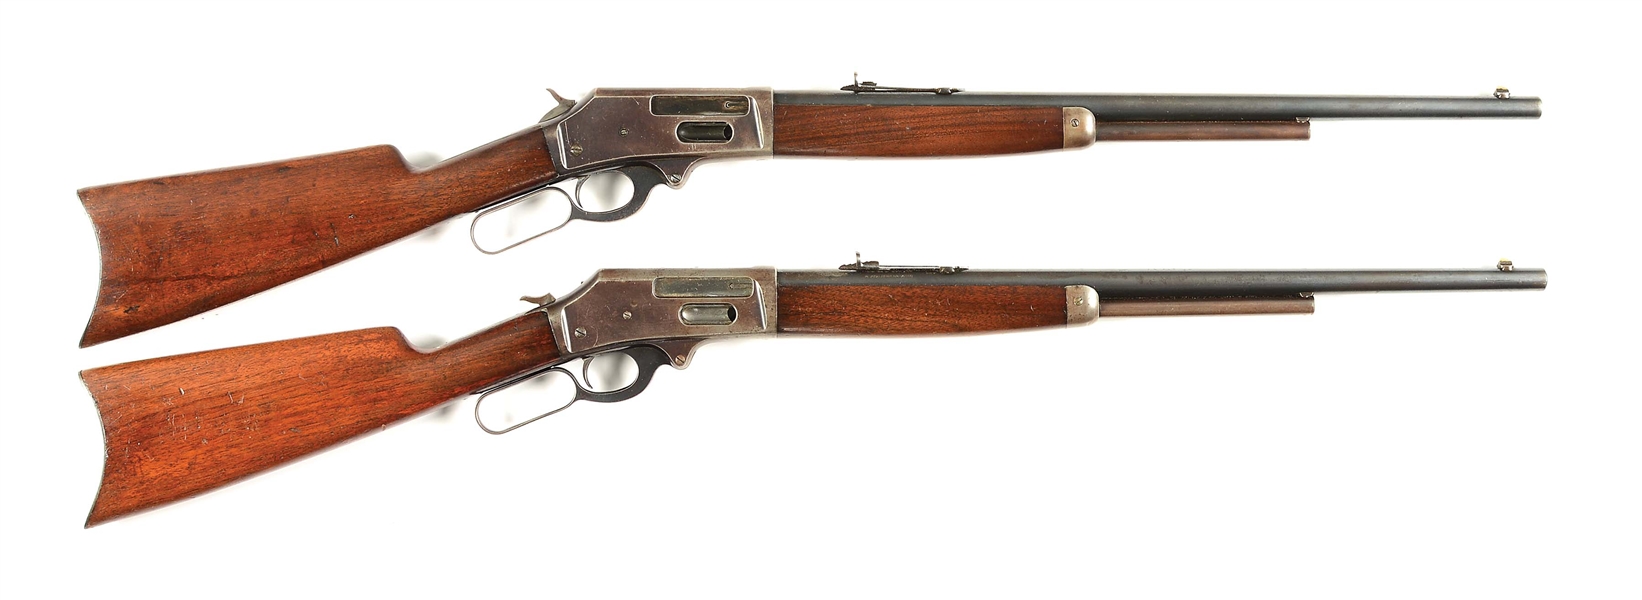 (C) RARE COLLECTORS LOT OF 2: STEVENS 425 HIGH POWER LEVER ACTION RIFLES.